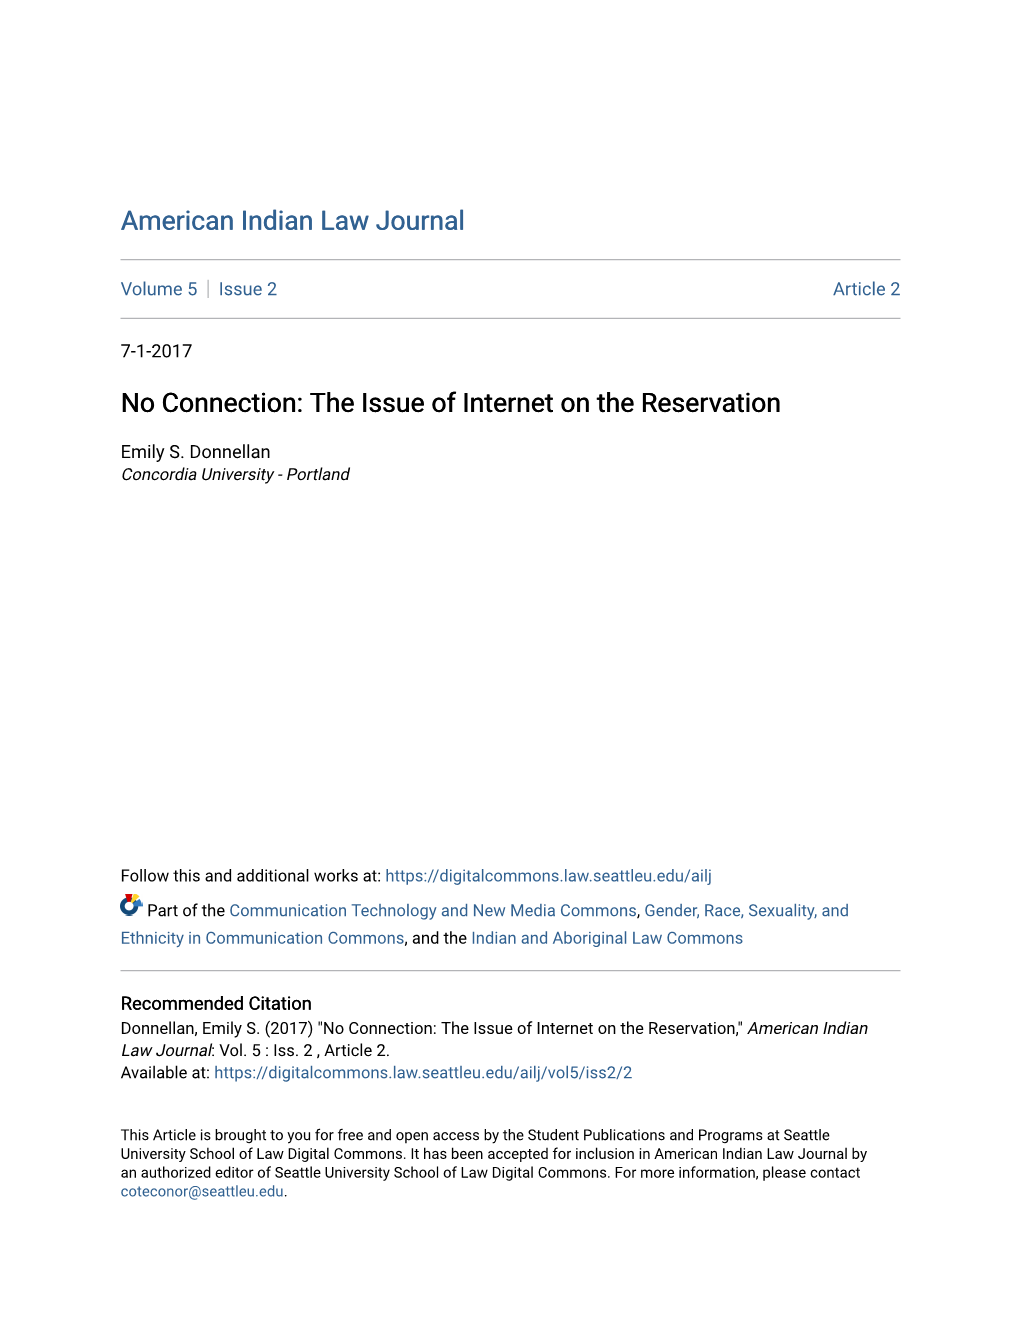 No Connection: the Issue of Internet on the Reservation